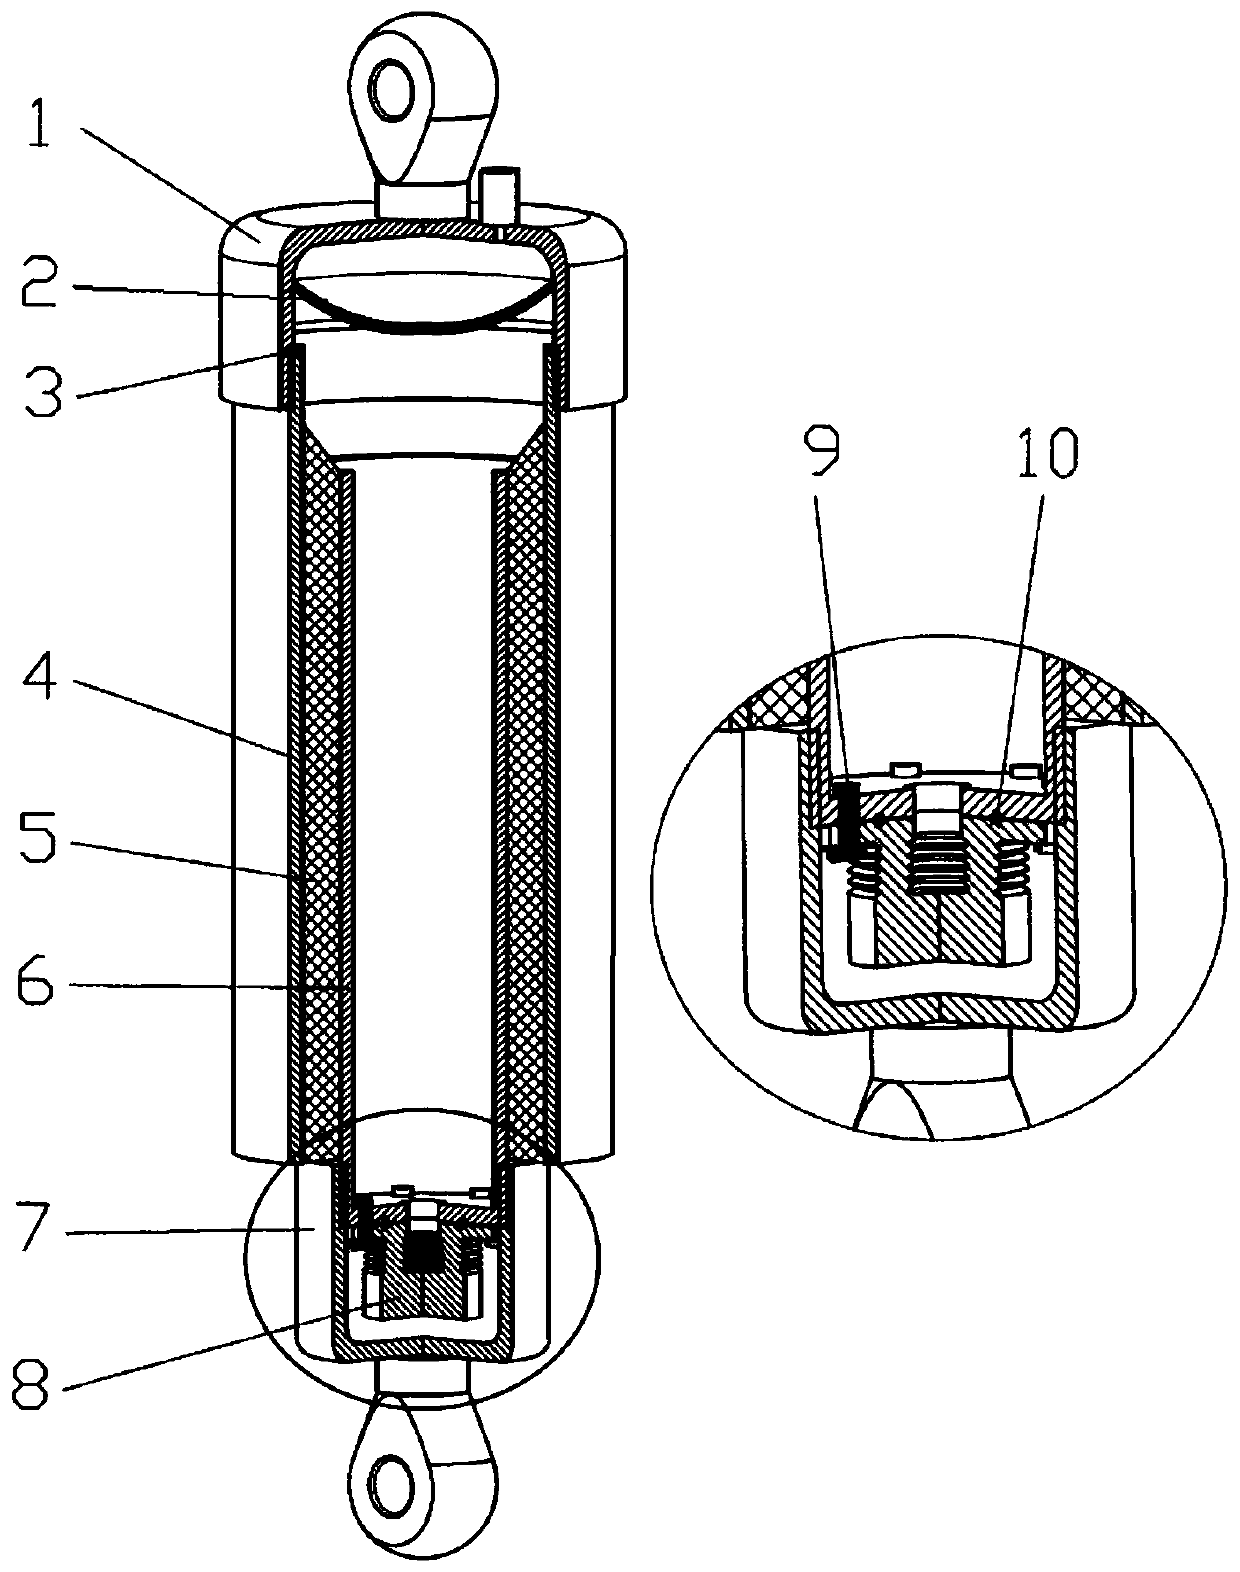 Hydraulic anti-resonance vibration isolator with frequency modulated by air spring